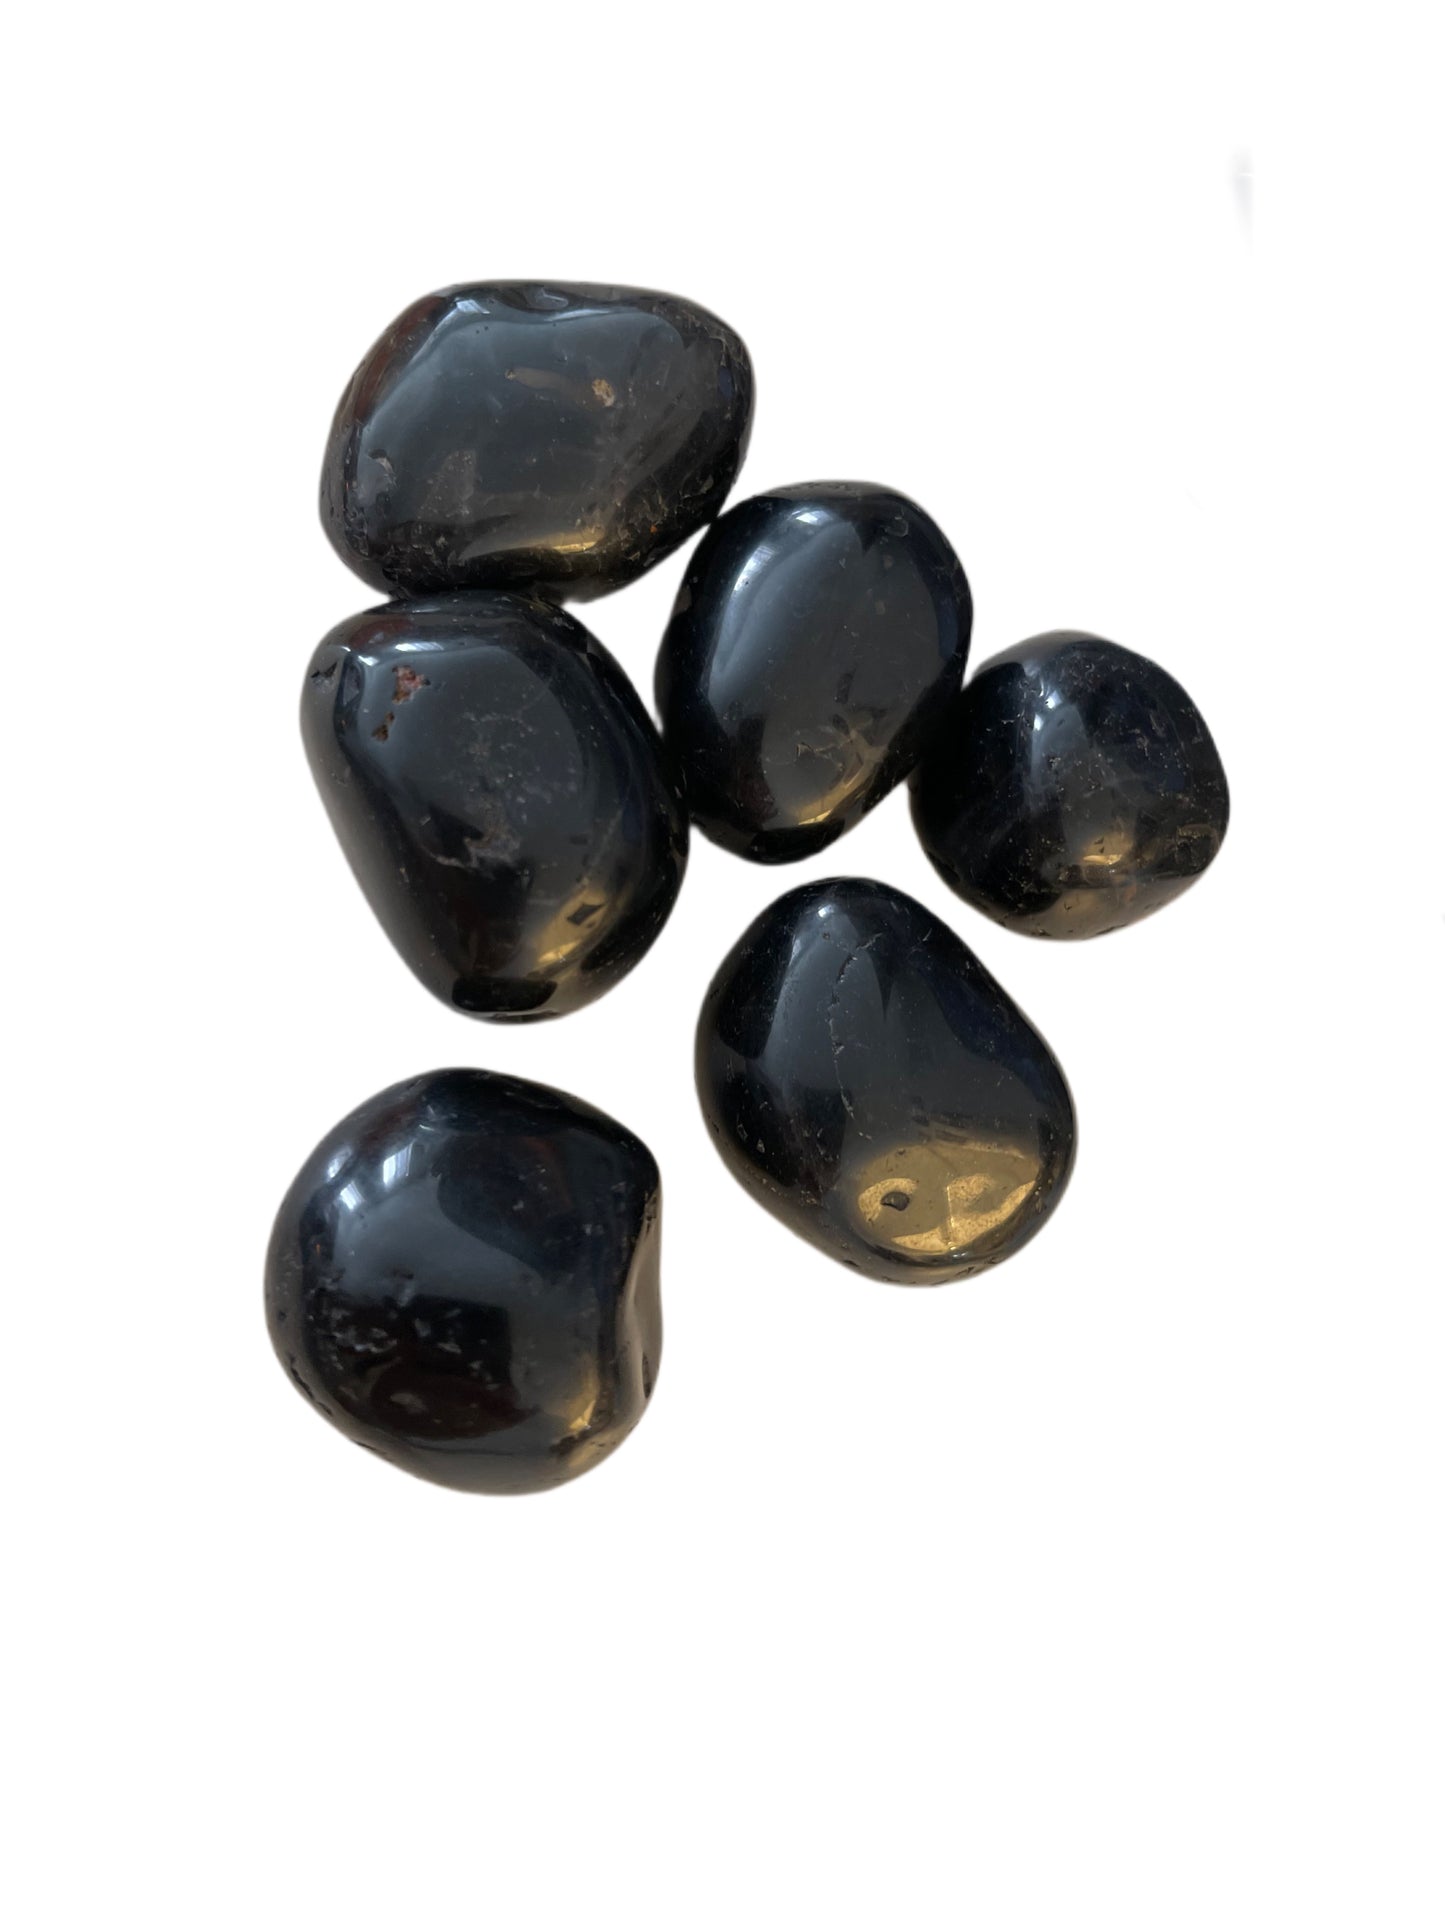 Black Onyx Tumbles - Available at West Palm Only